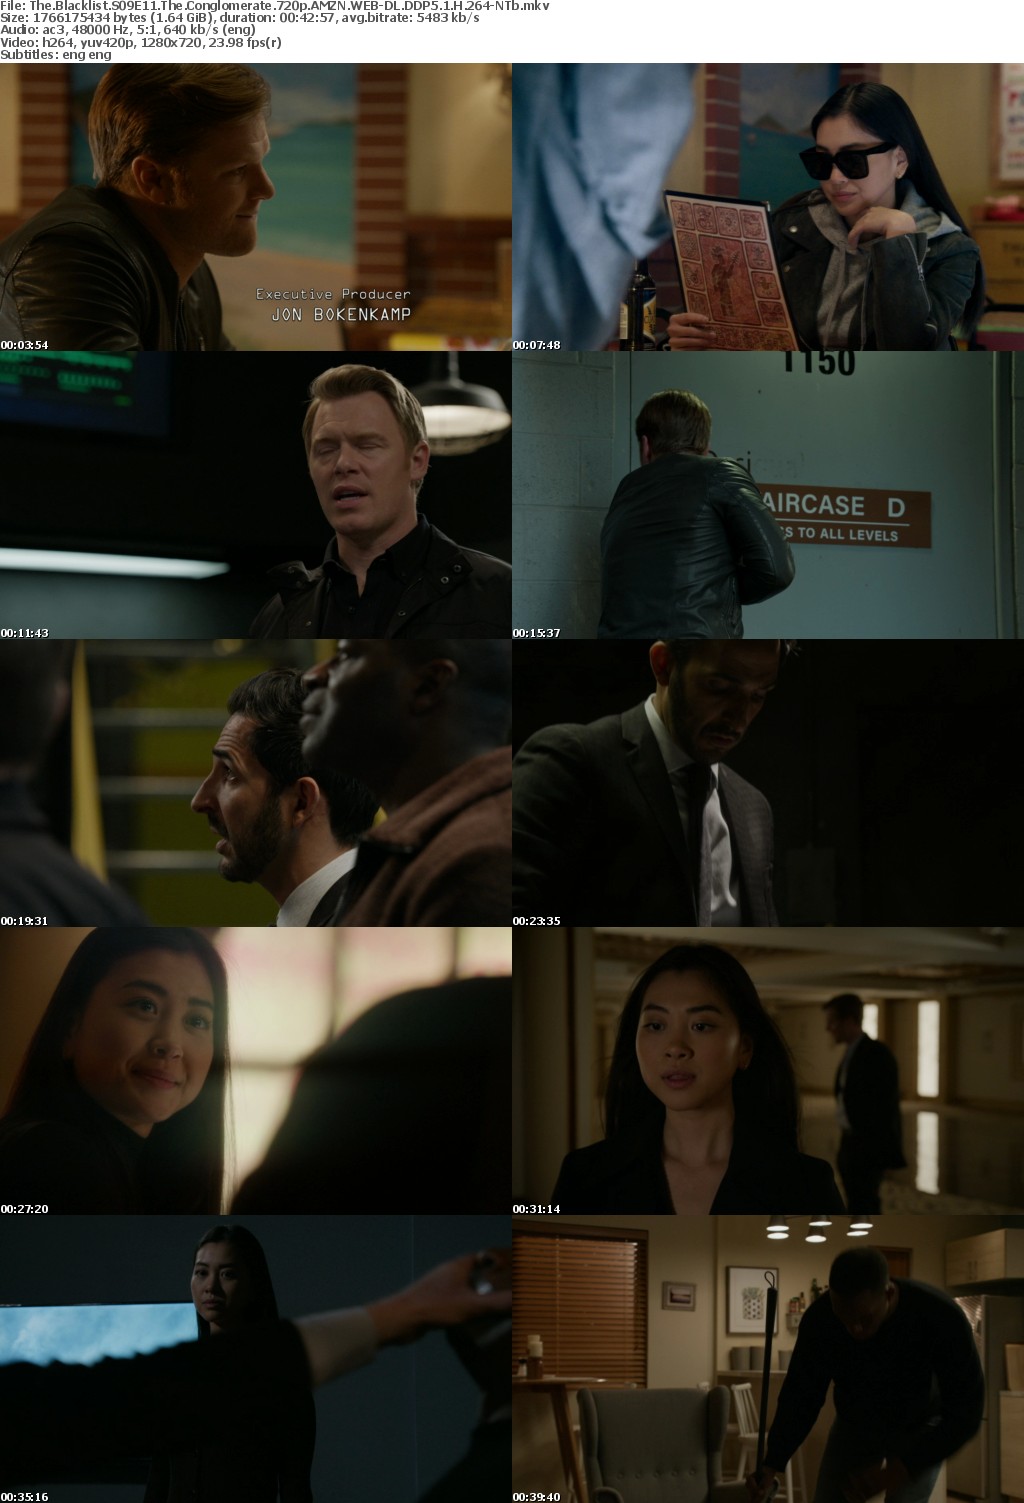 The Blacklist S09E11 The Conglomerate 720p AMZN WEBRip DDP5 1 x264-NTb